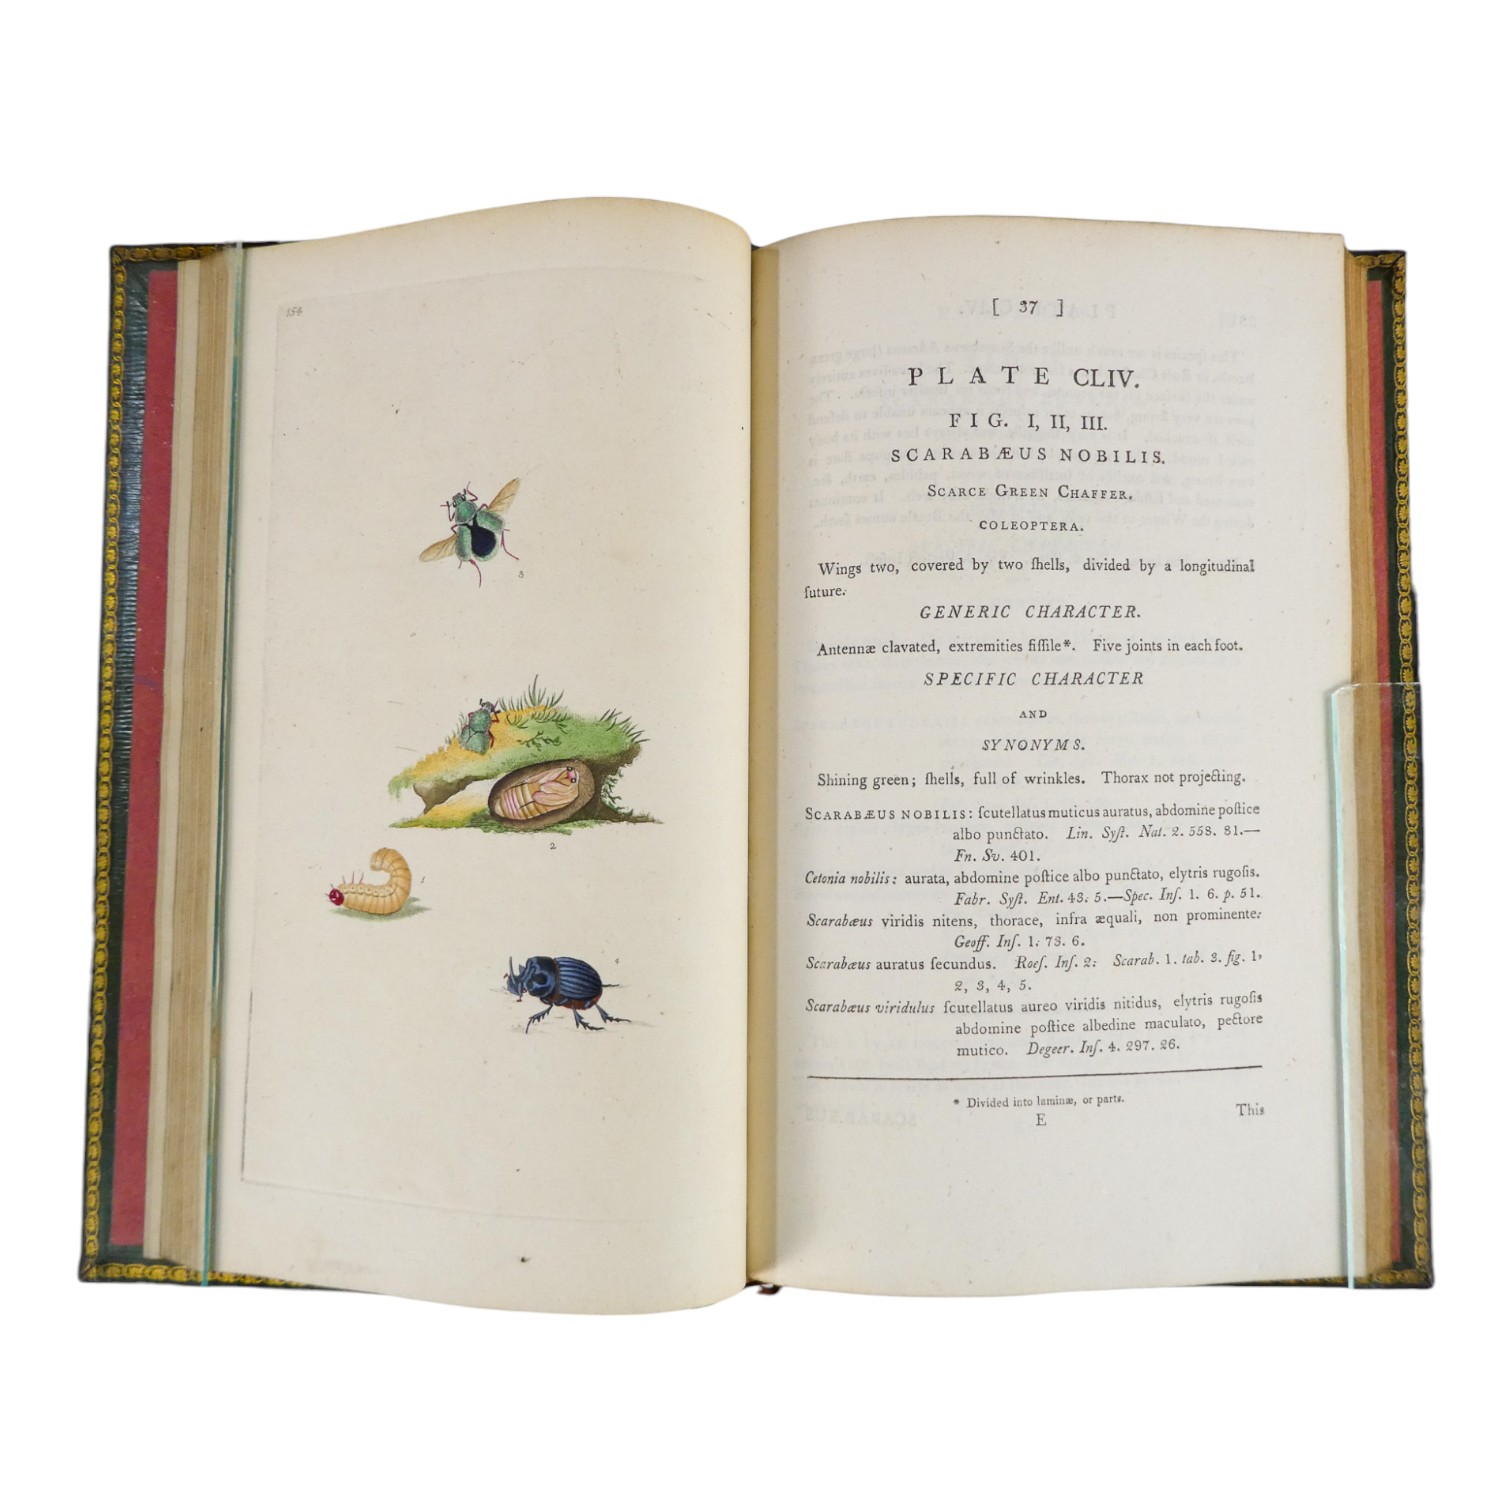 DONOVAN Edward, The Natural History of British Insects ... - published F & C Rivington 62 St Paul' - Image 13 of 33